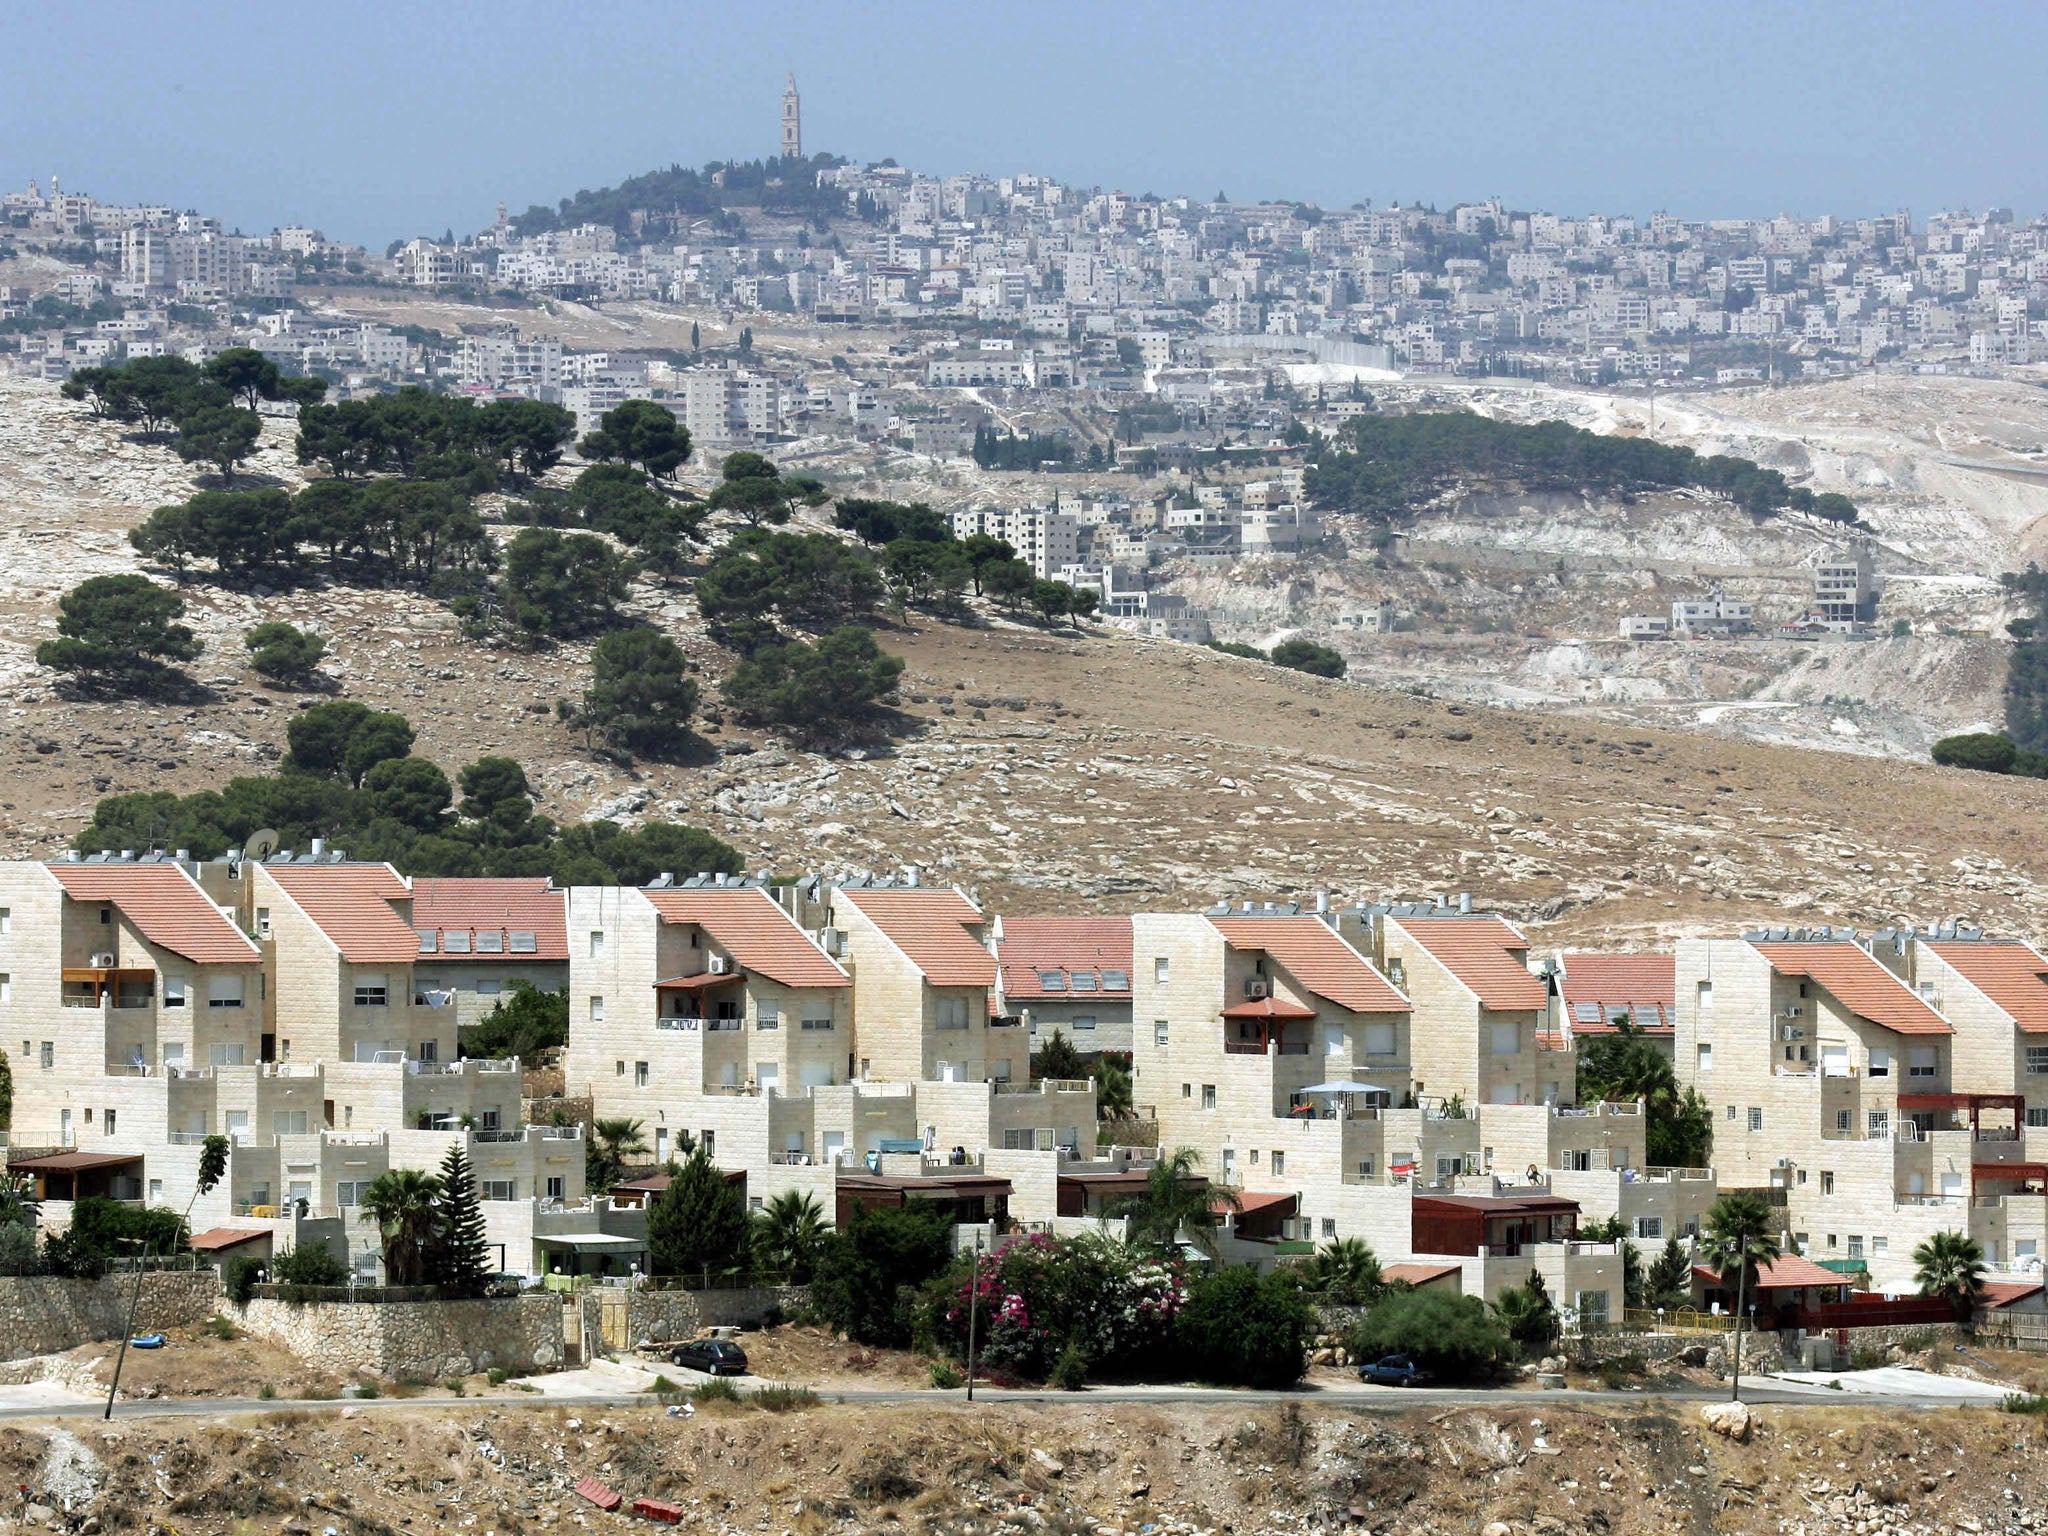 Houses (foreground) of the West Bank settlement of Maale Adumim